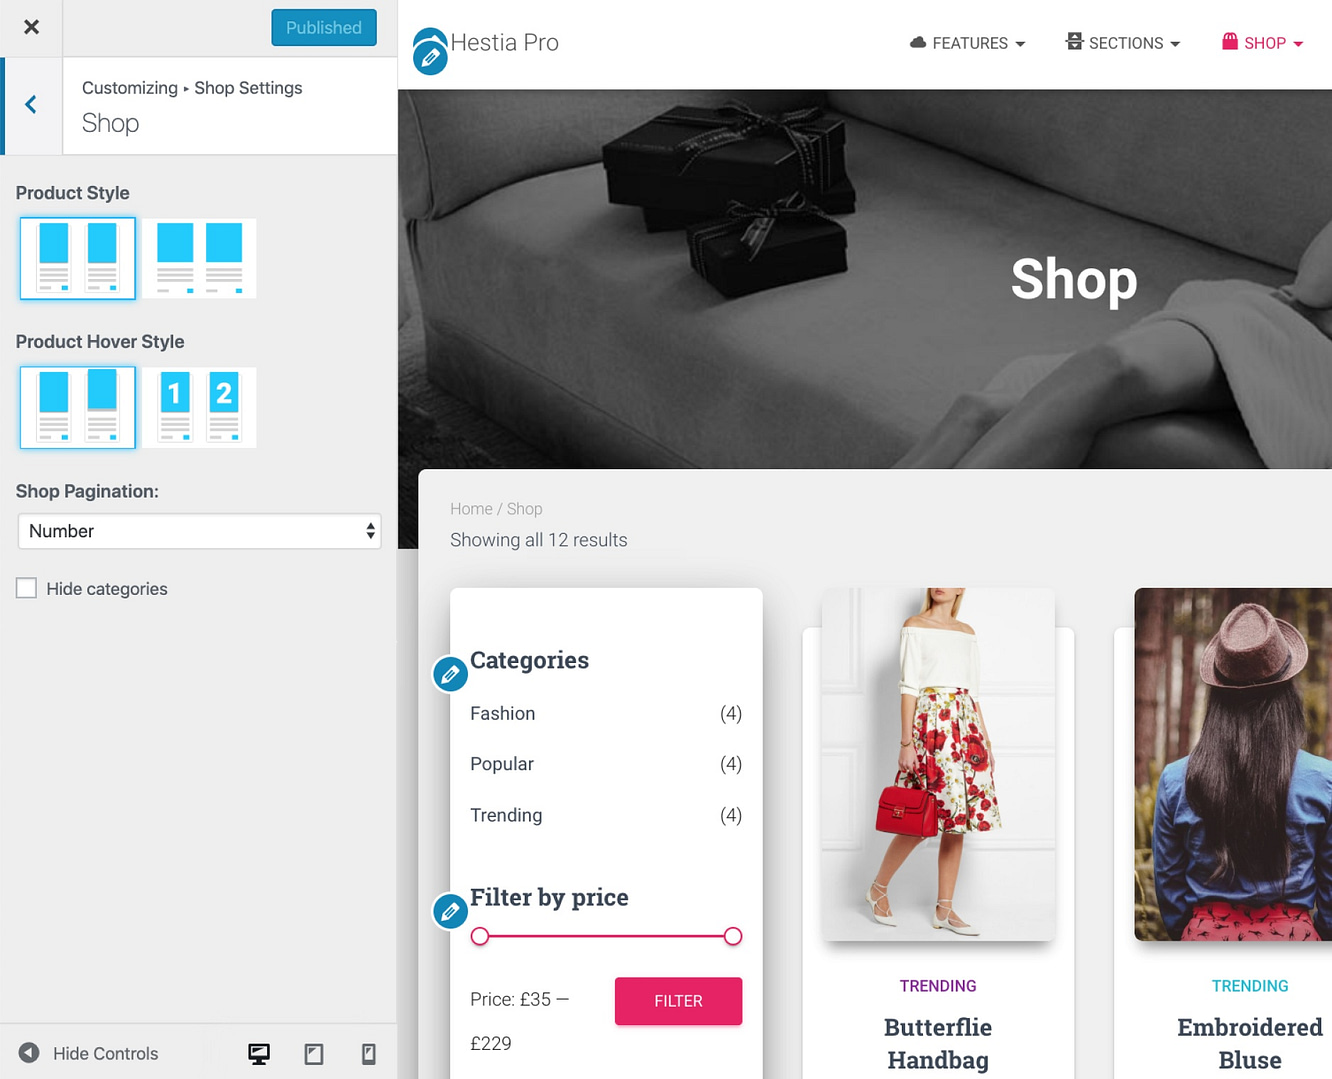 Hestia Pro has different WooCommerce product display options like hover